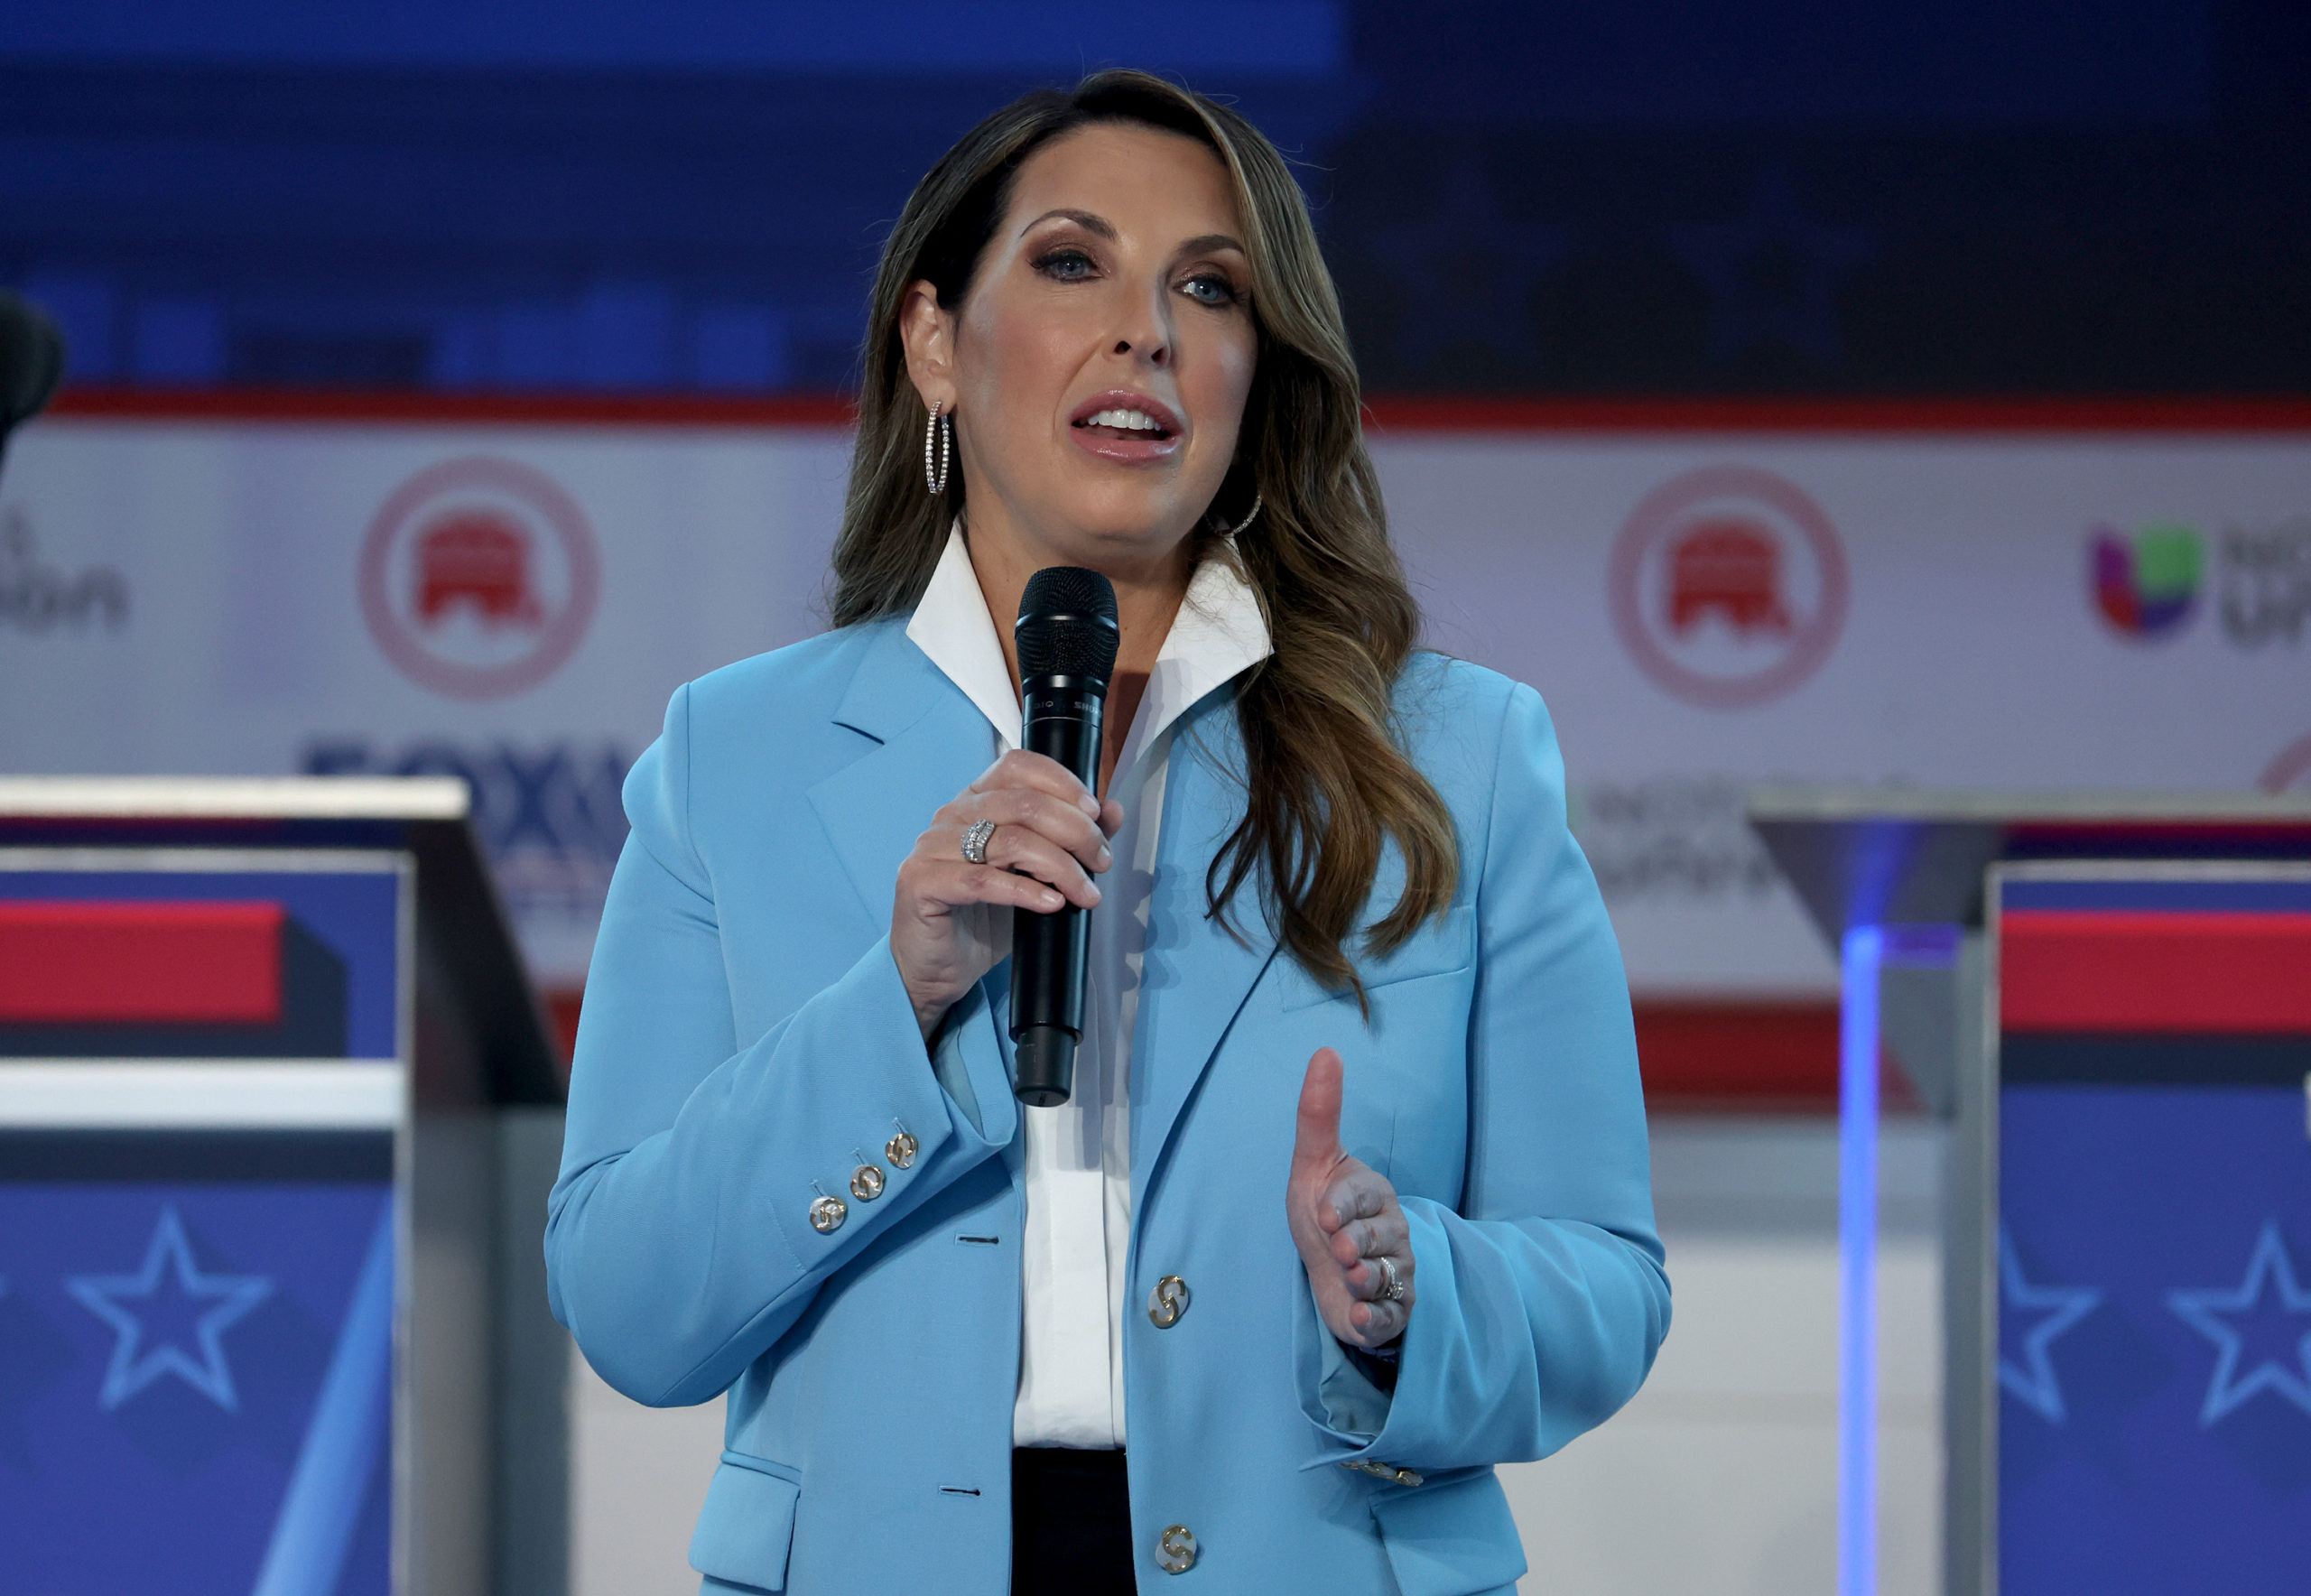 SIMI VALLEY, CALIFORNIA - SEPTEMBER 27: Ronna McDaniel, Chair of the Republican Party, delivers remarks during the FOX Business Republican Primary Debate at the Ronald Reagan Presidential Library on September 27, 2023 in Simi Valley, California. Seven presidential hopefuls squared off in the second Republican primary debate as former U.S. President Donald Trump, currently facing indictments in four locations, declined again to participate. (Photo by Justin Sullivan/Getty Images)